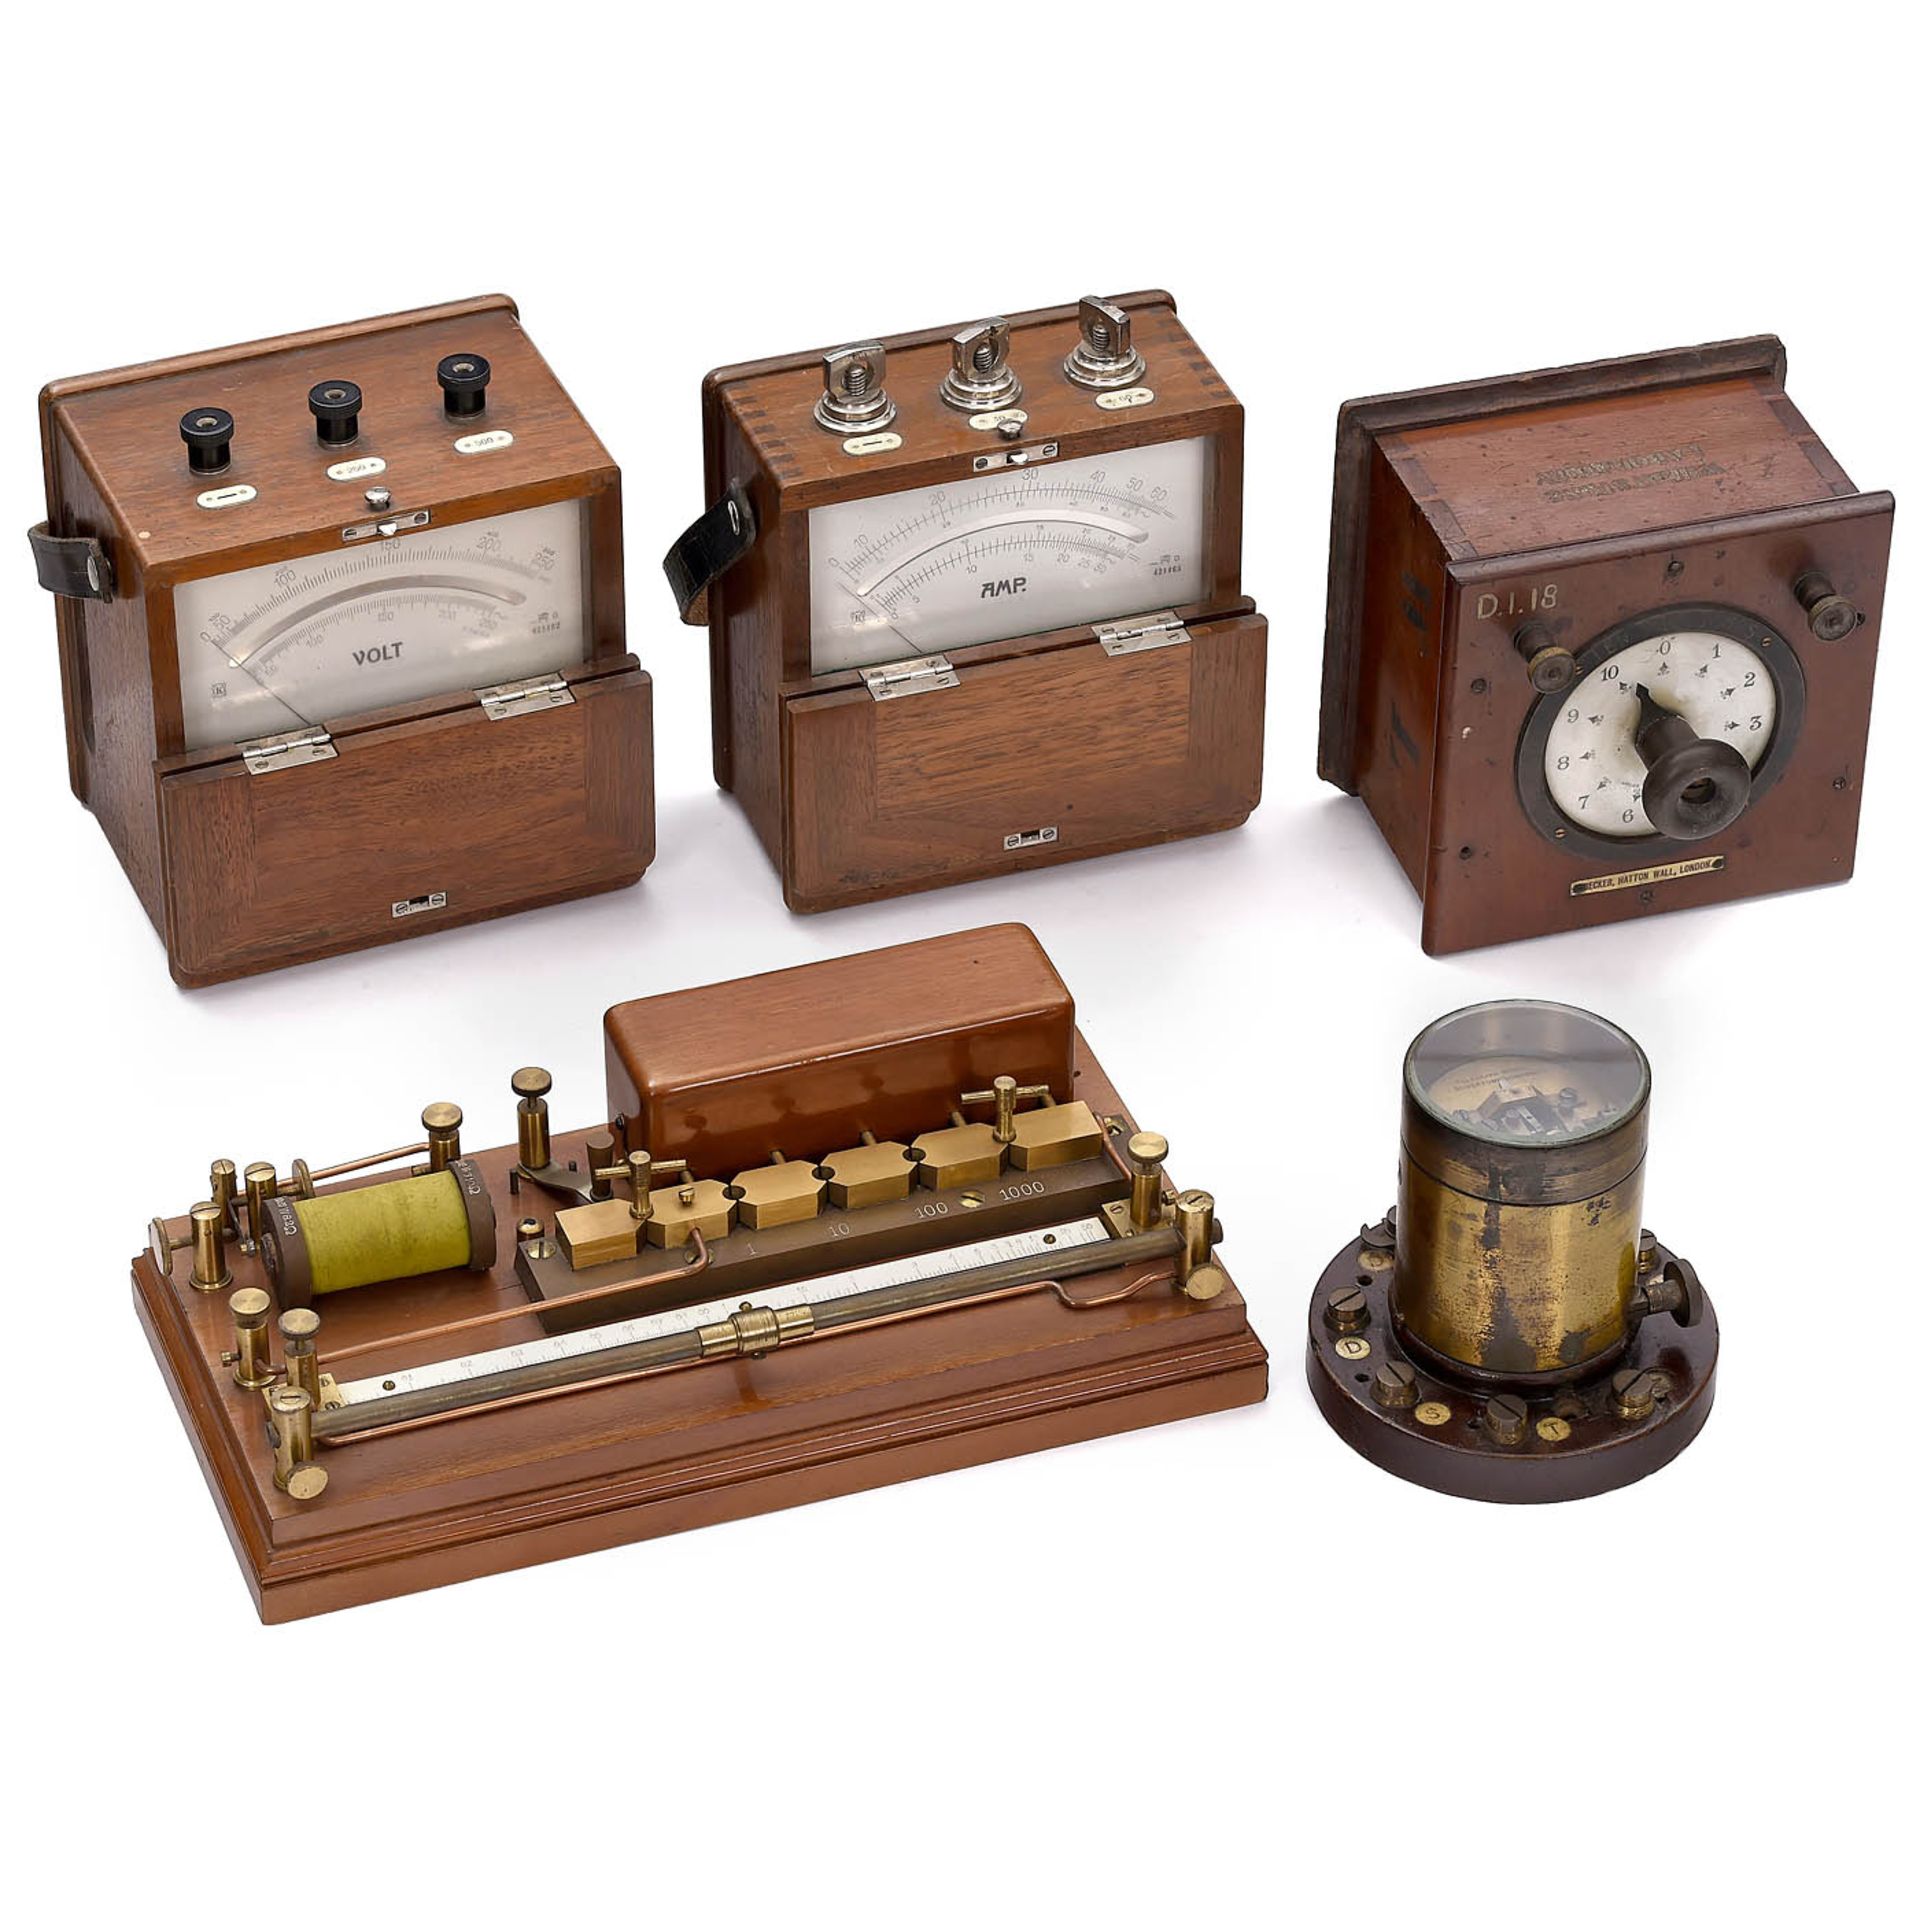 Collection of Technical Devices and Measuring Instruments, c. 1910 - Image 2 of 3